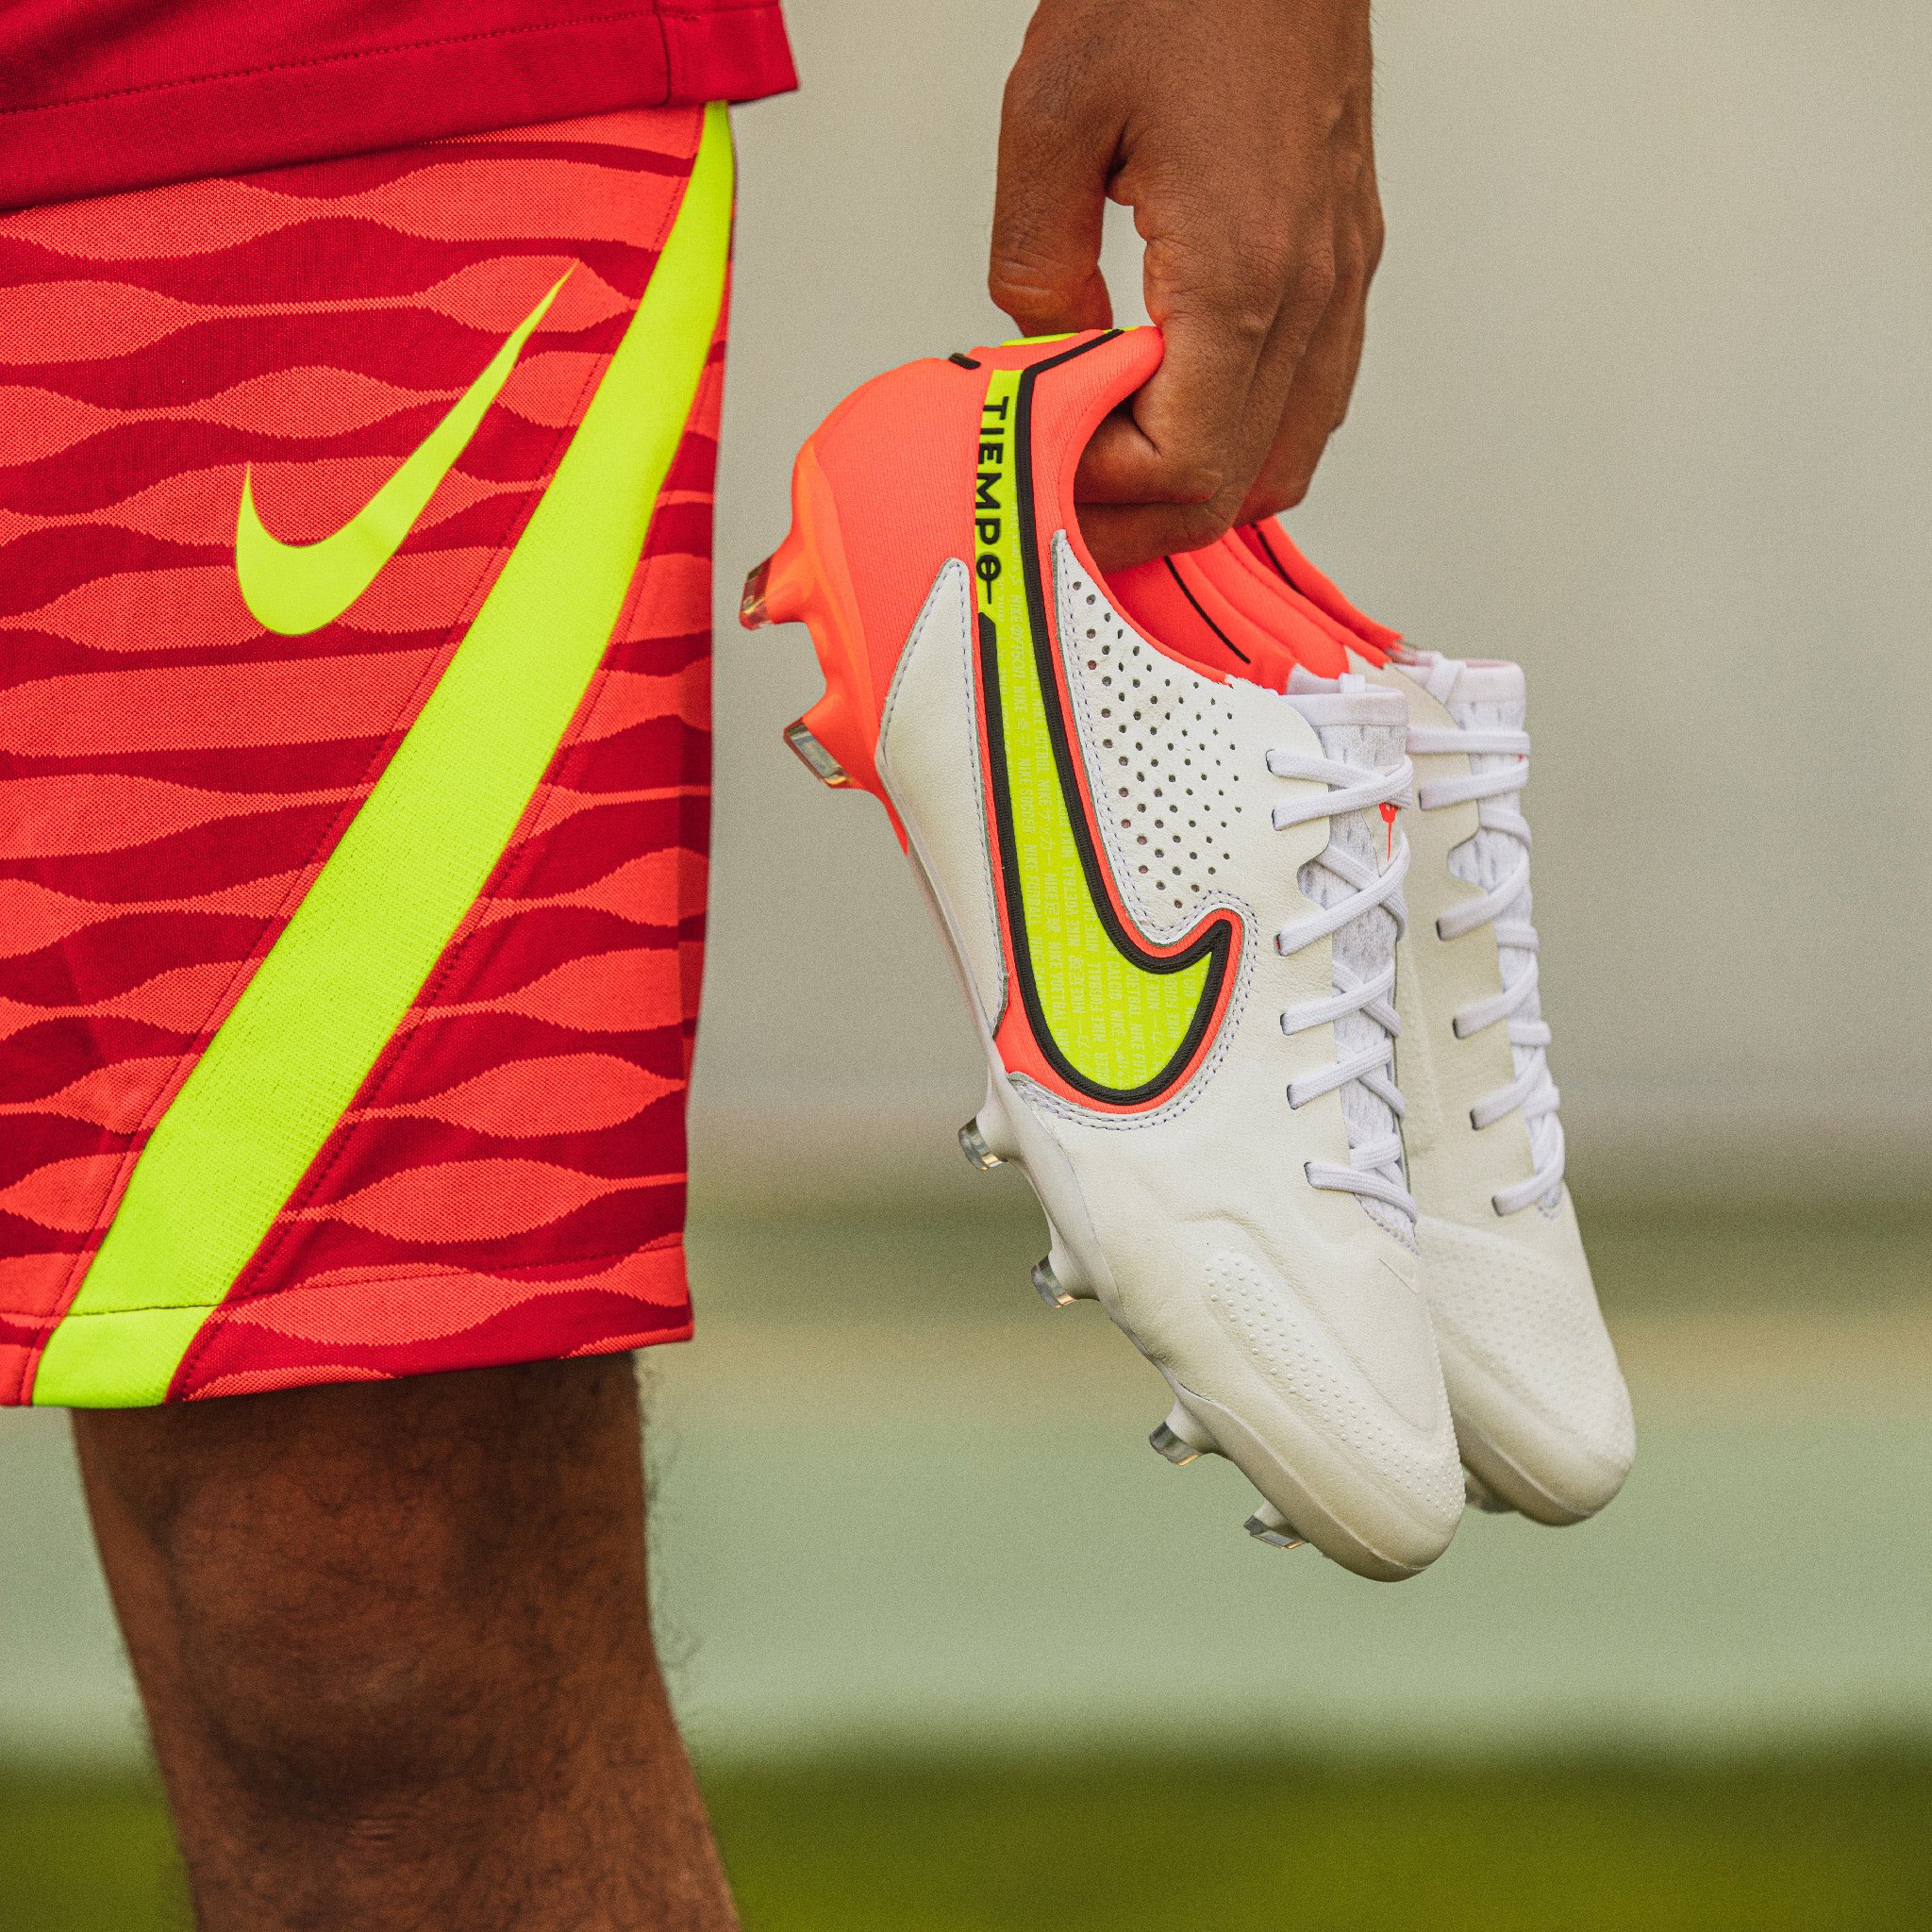 Nike Football on Twitter: "Find your motivation from the ground up with the  new Nike Football Motivation Pack: the Tiempo Legend 9, the Mercurial  Superfly 8, the Mercurial Vapor 14, the Phantom